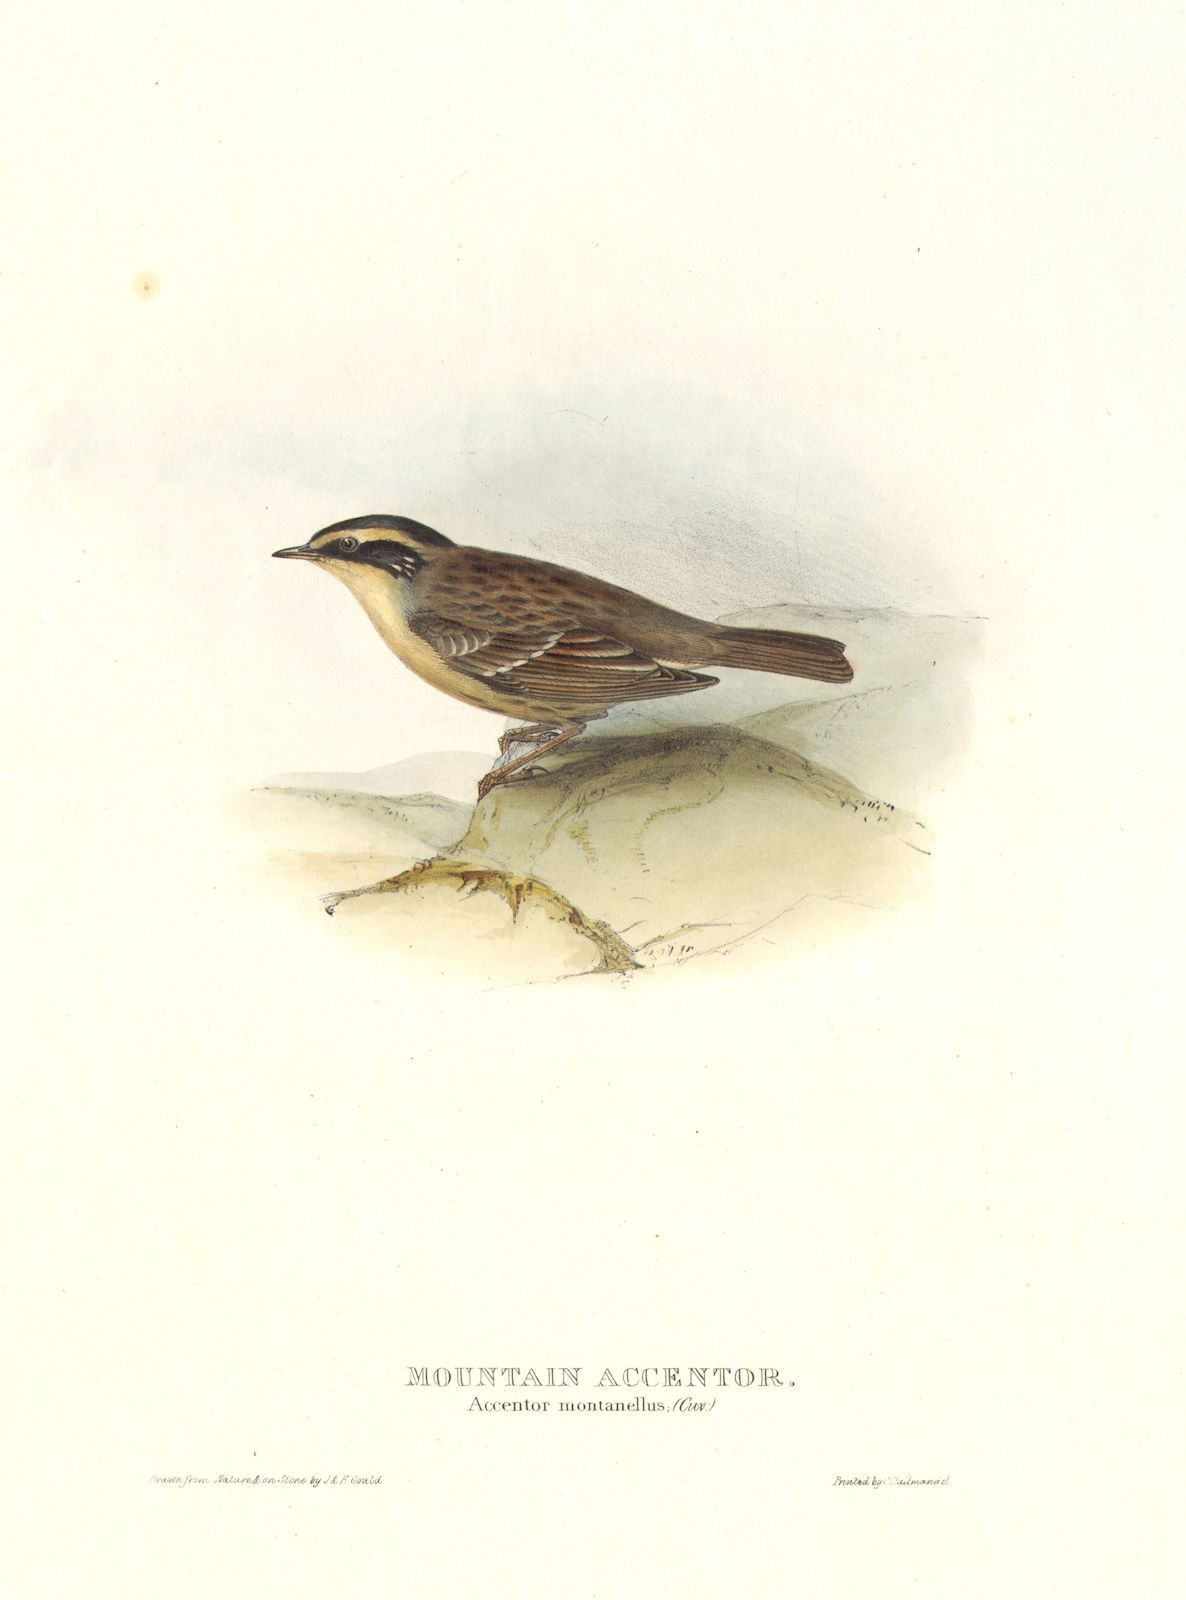 SIBERIAN/MOUNTAIN ACCENTOR. Prunella montanella/montanellus. Large. GOULD c1832